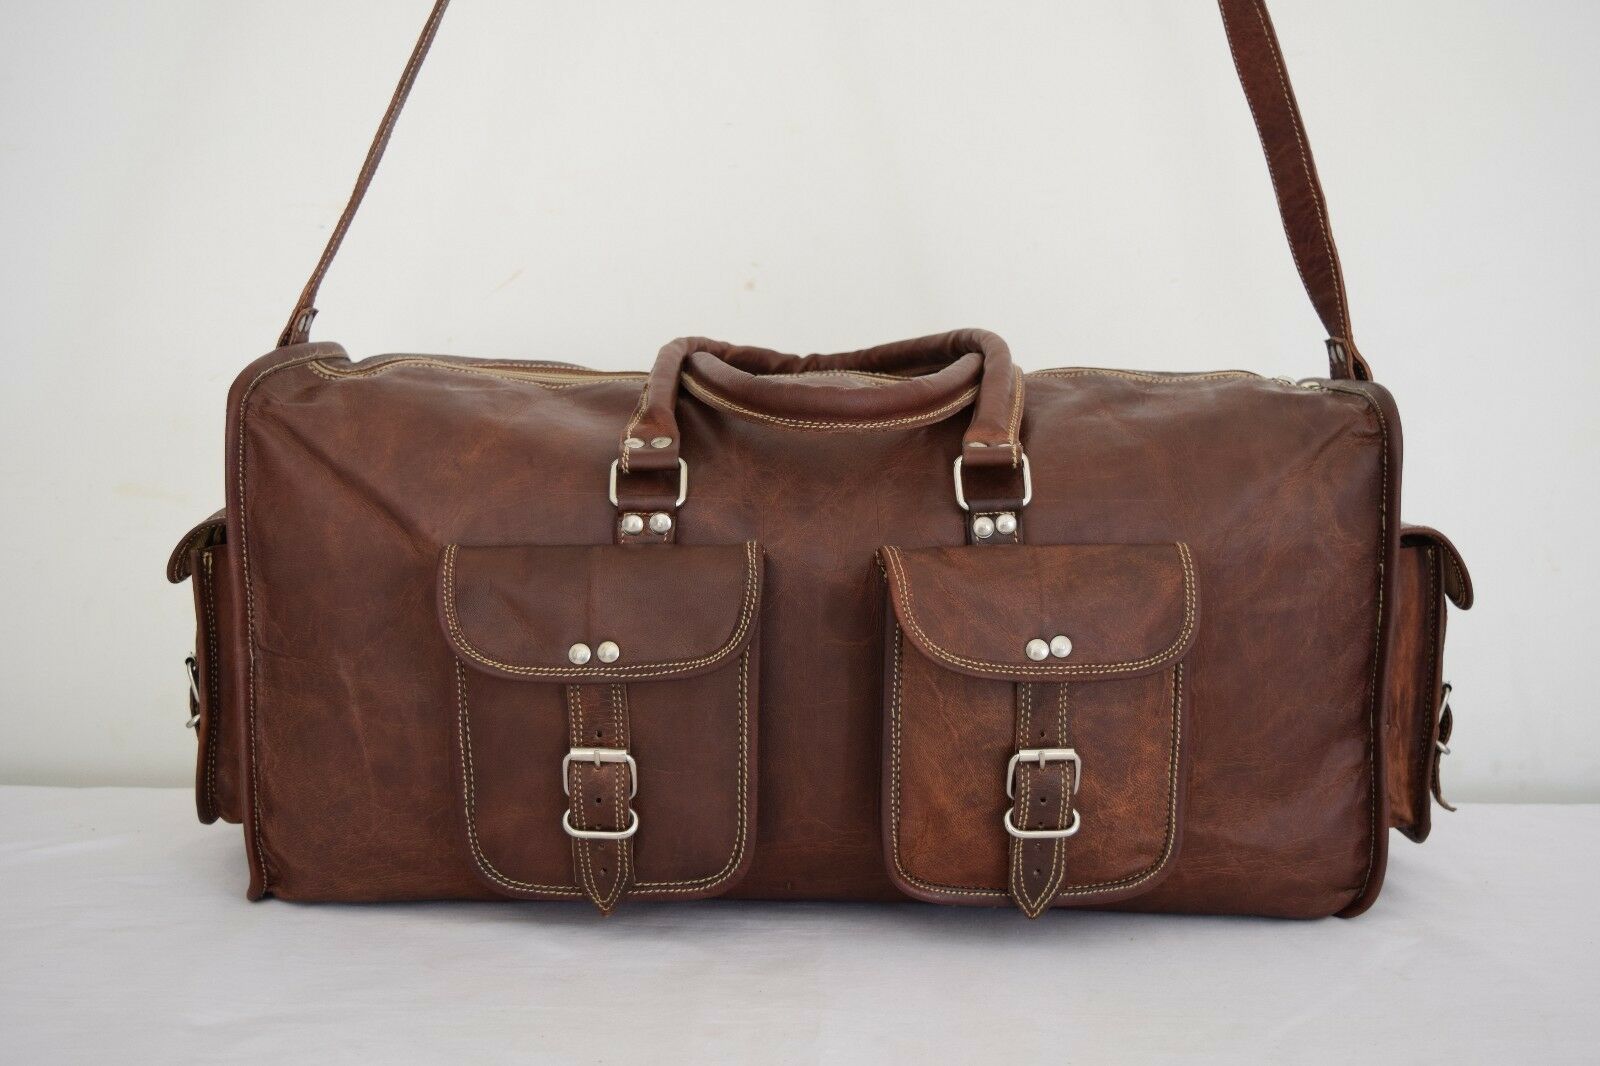 Vintage Leather Duffle Holdall Bag Sports Gym Travel Luggage Weekend ...